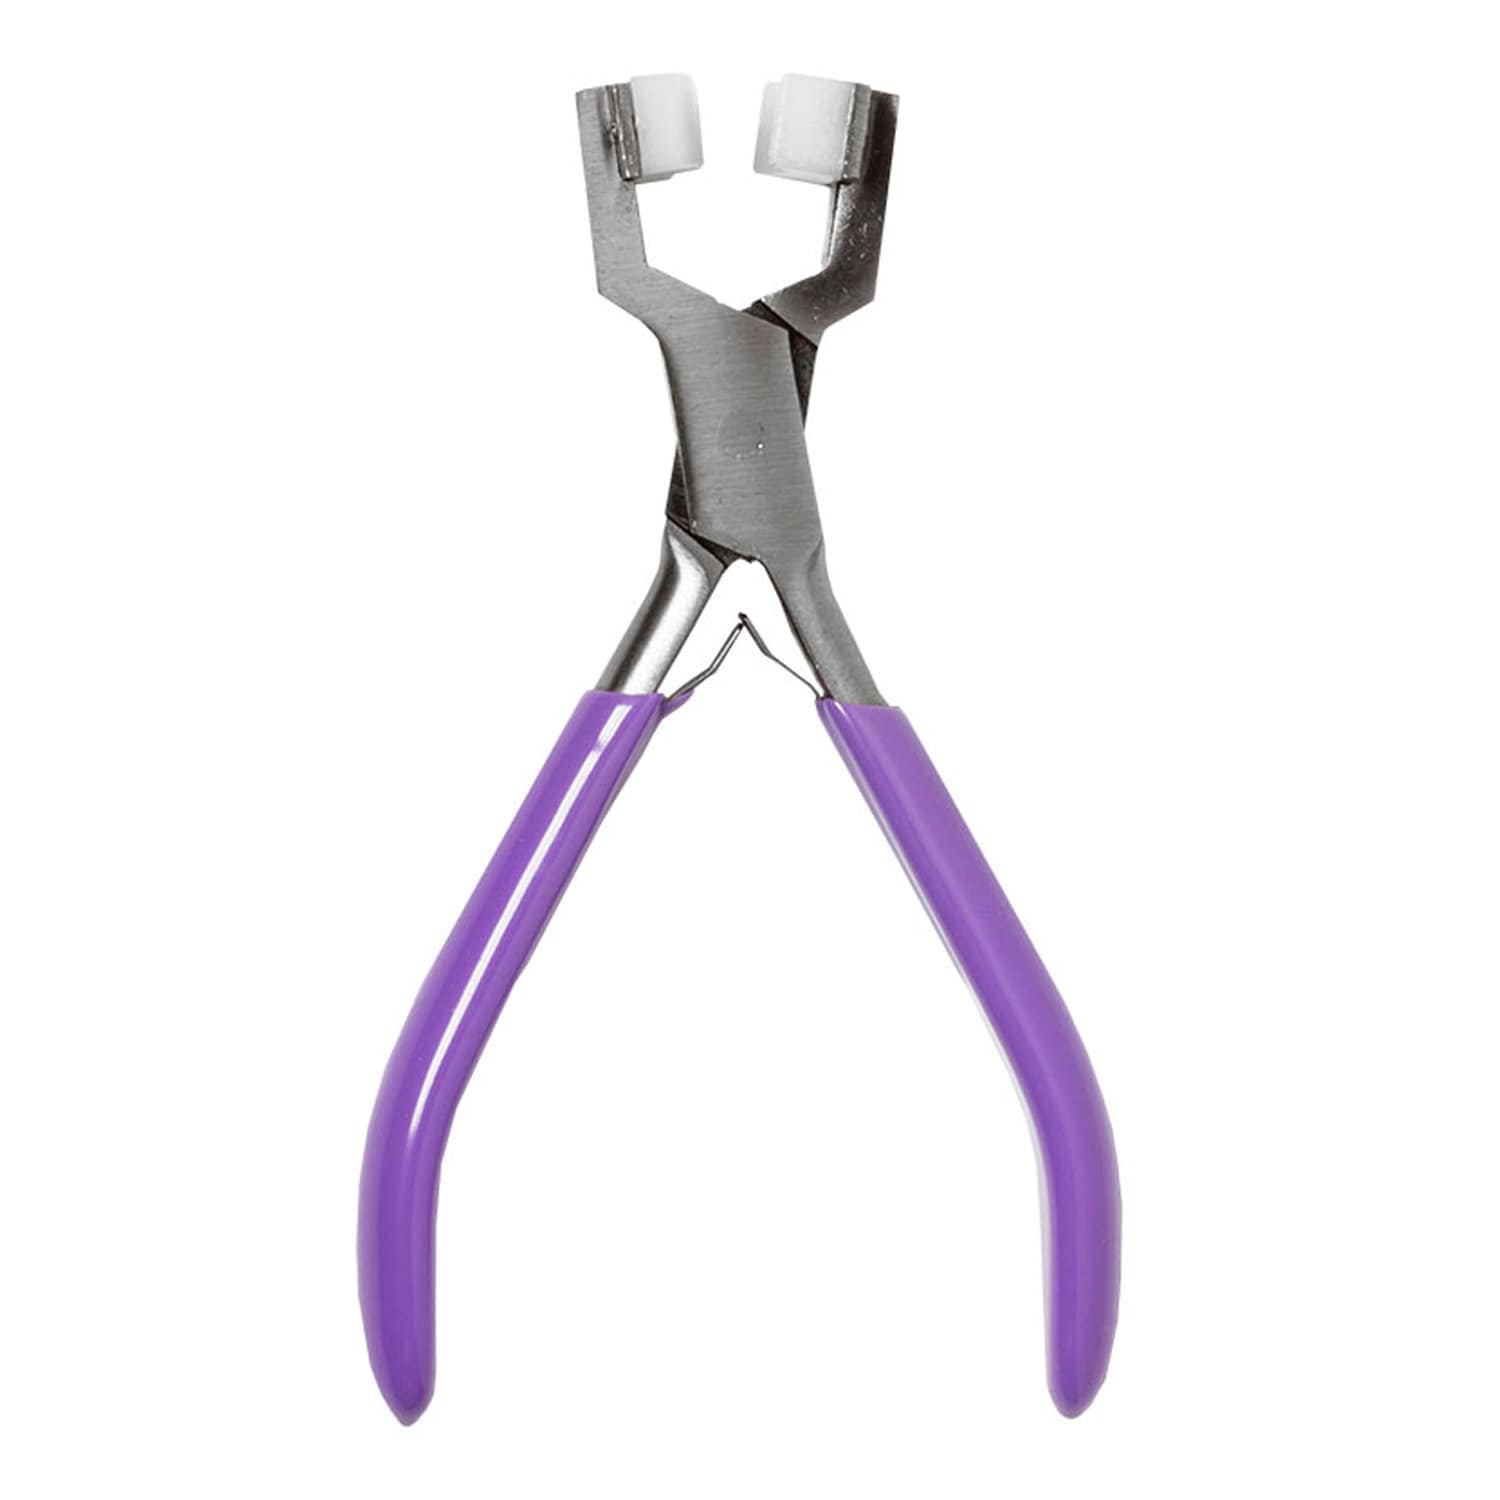 5-3/4 Flat Nose Pliers with Extra Nylon Jaws Jewelry Making Non-Marring  Metal Wire Forming Tool - PLR-0133